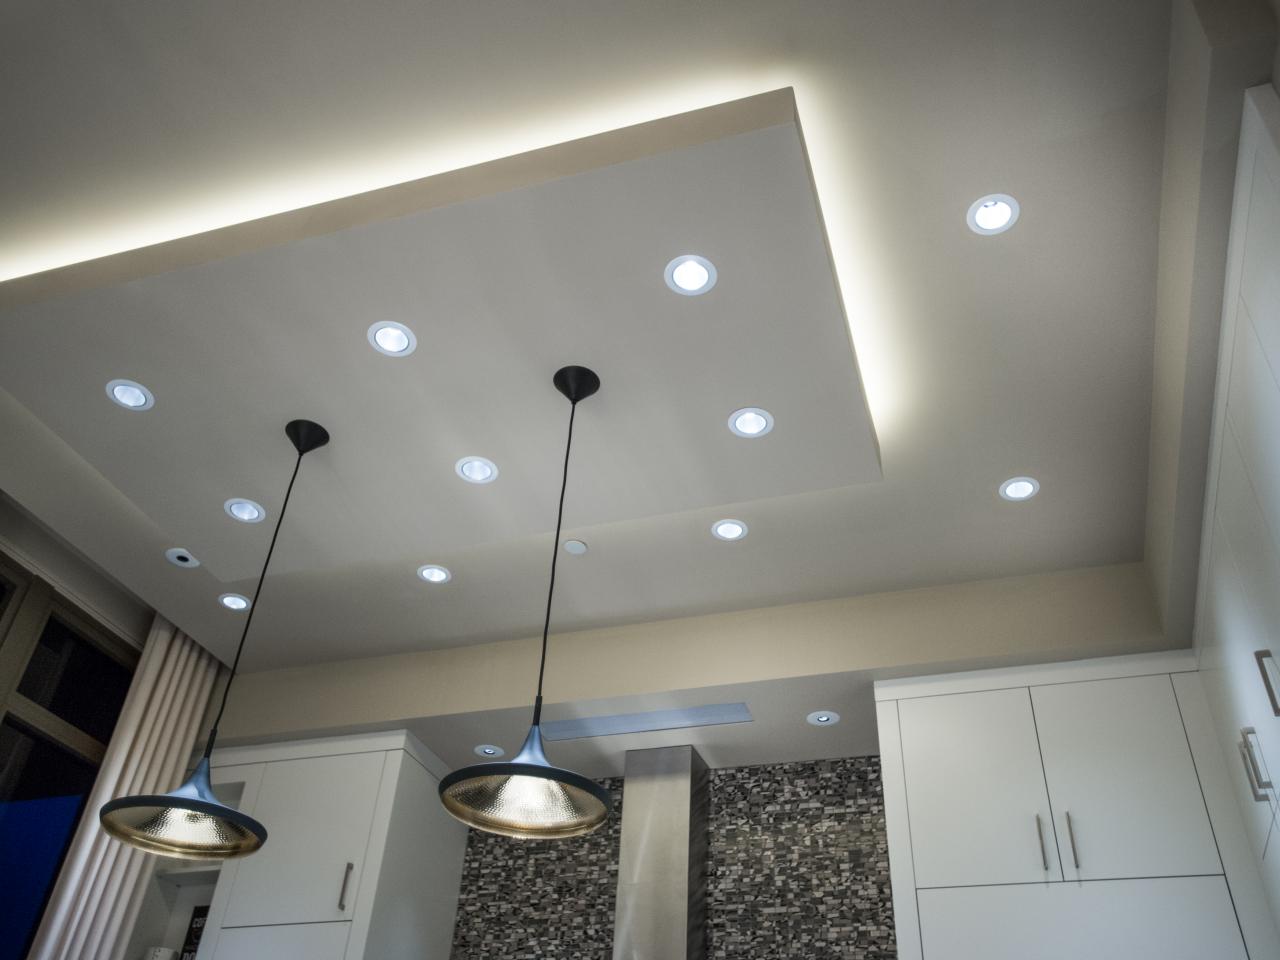 installing led recessed light in kitchen ceiling